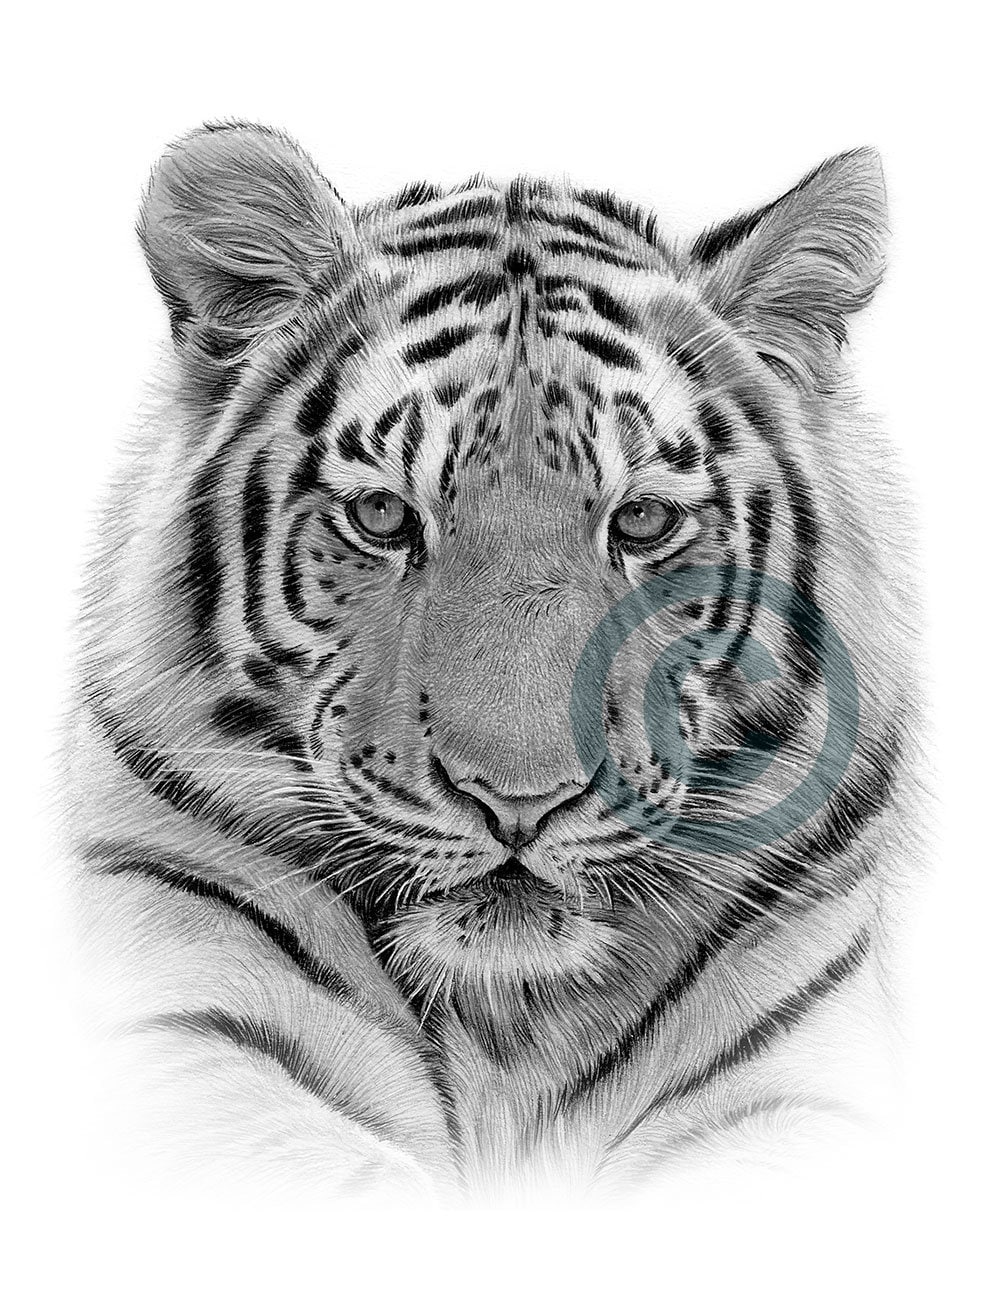 How to Draw a Realistic Tiger Head  Tiger Face Drawing Step by Step   YouTube